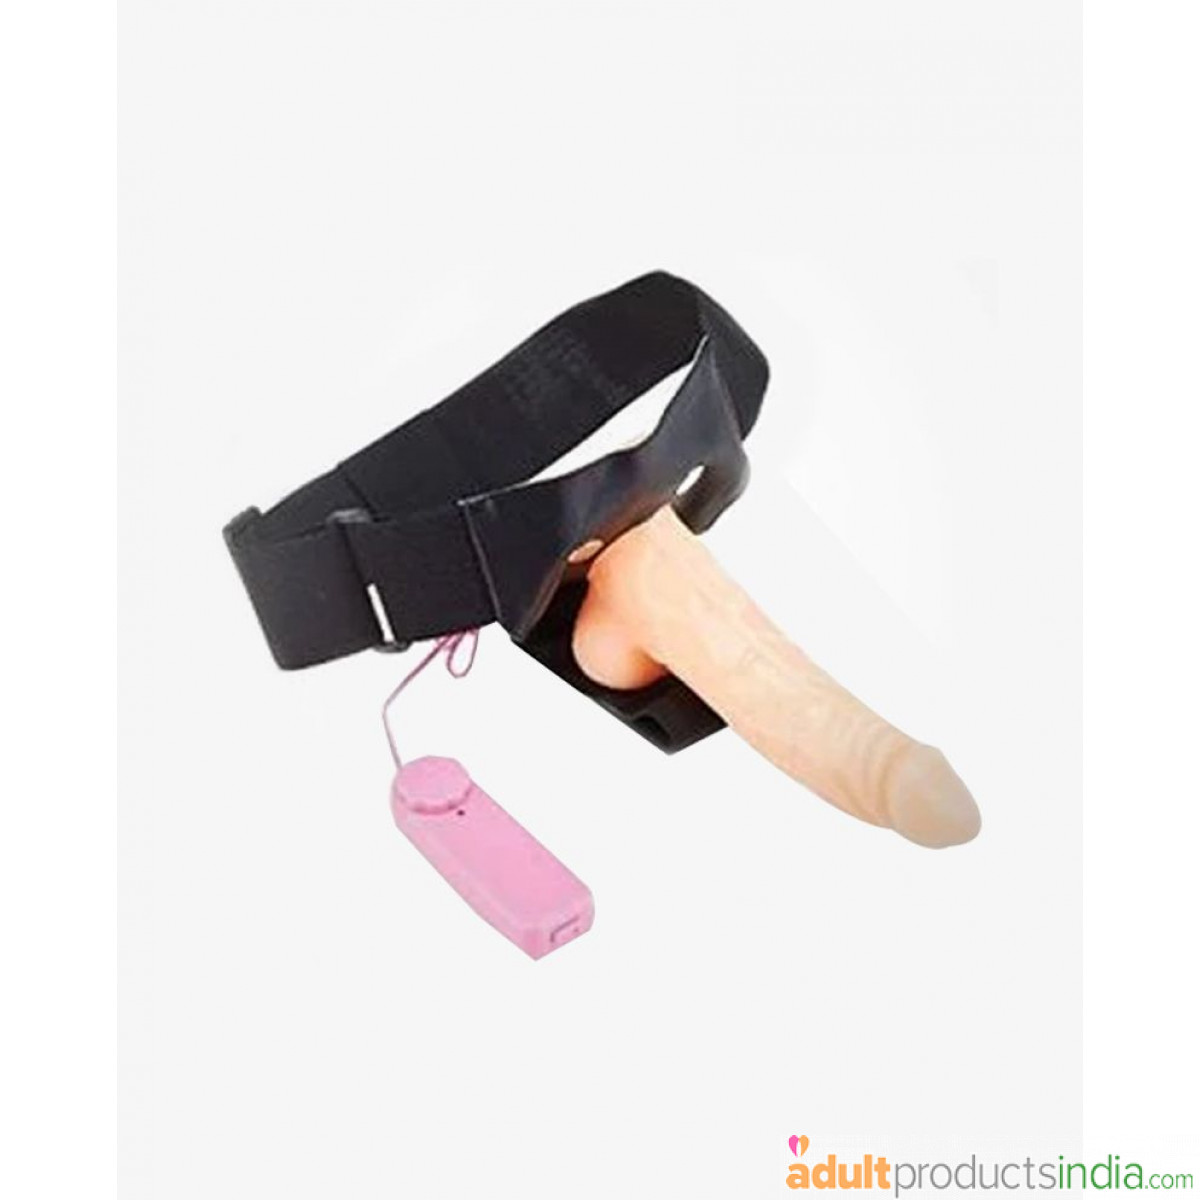 Realistic Solid Strap On Dildo With Vibration